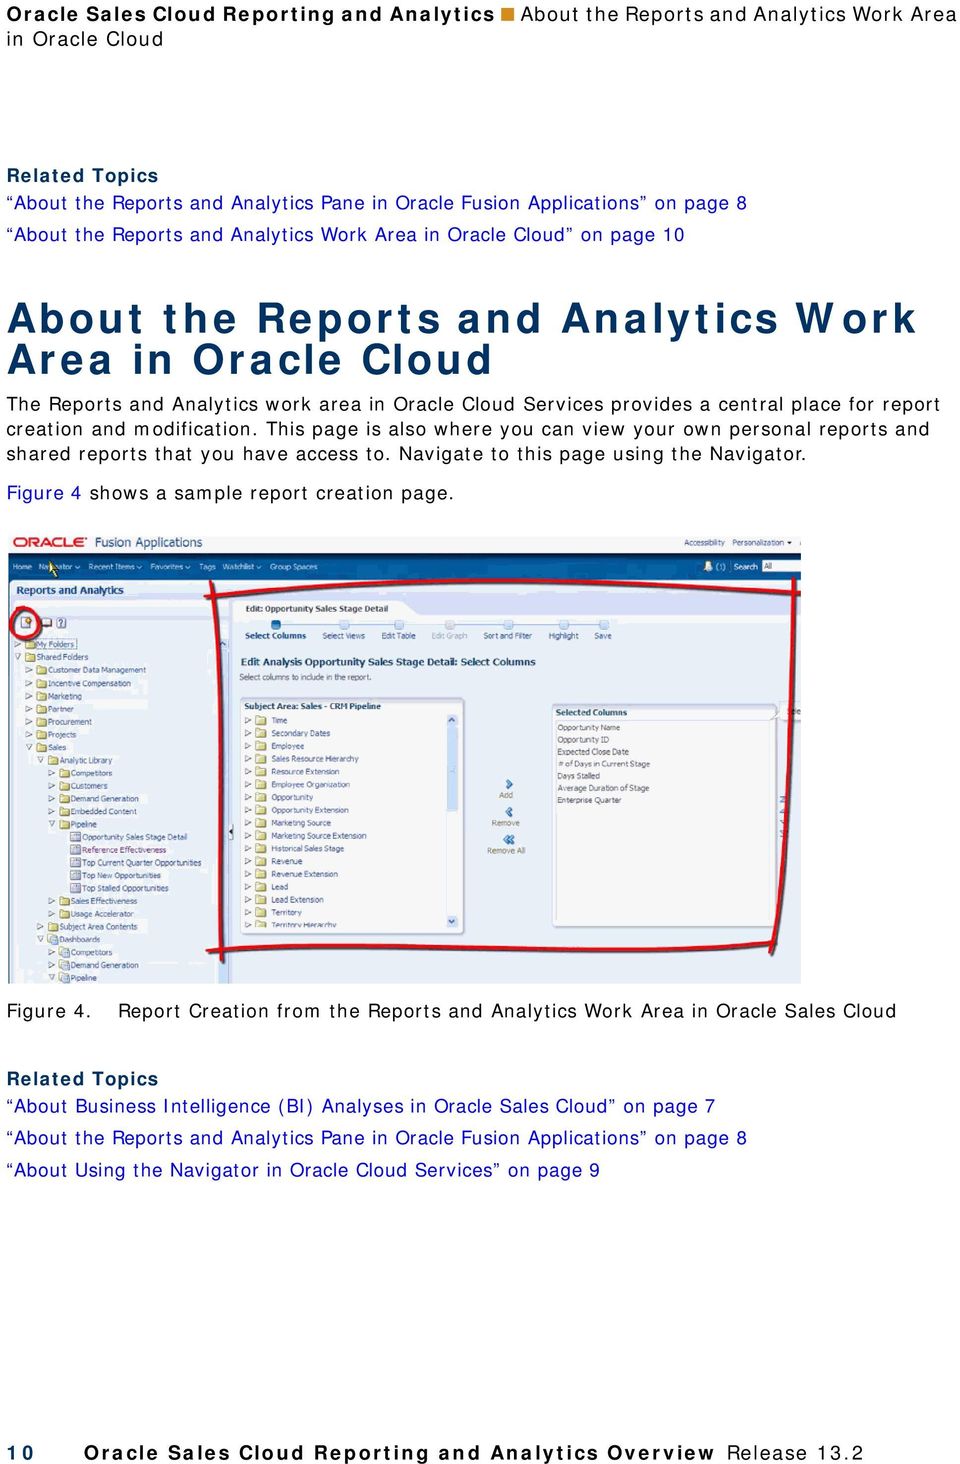 central place for report creation and modification. This page is also where you can view your own personal reports and shared reports that you have access to.